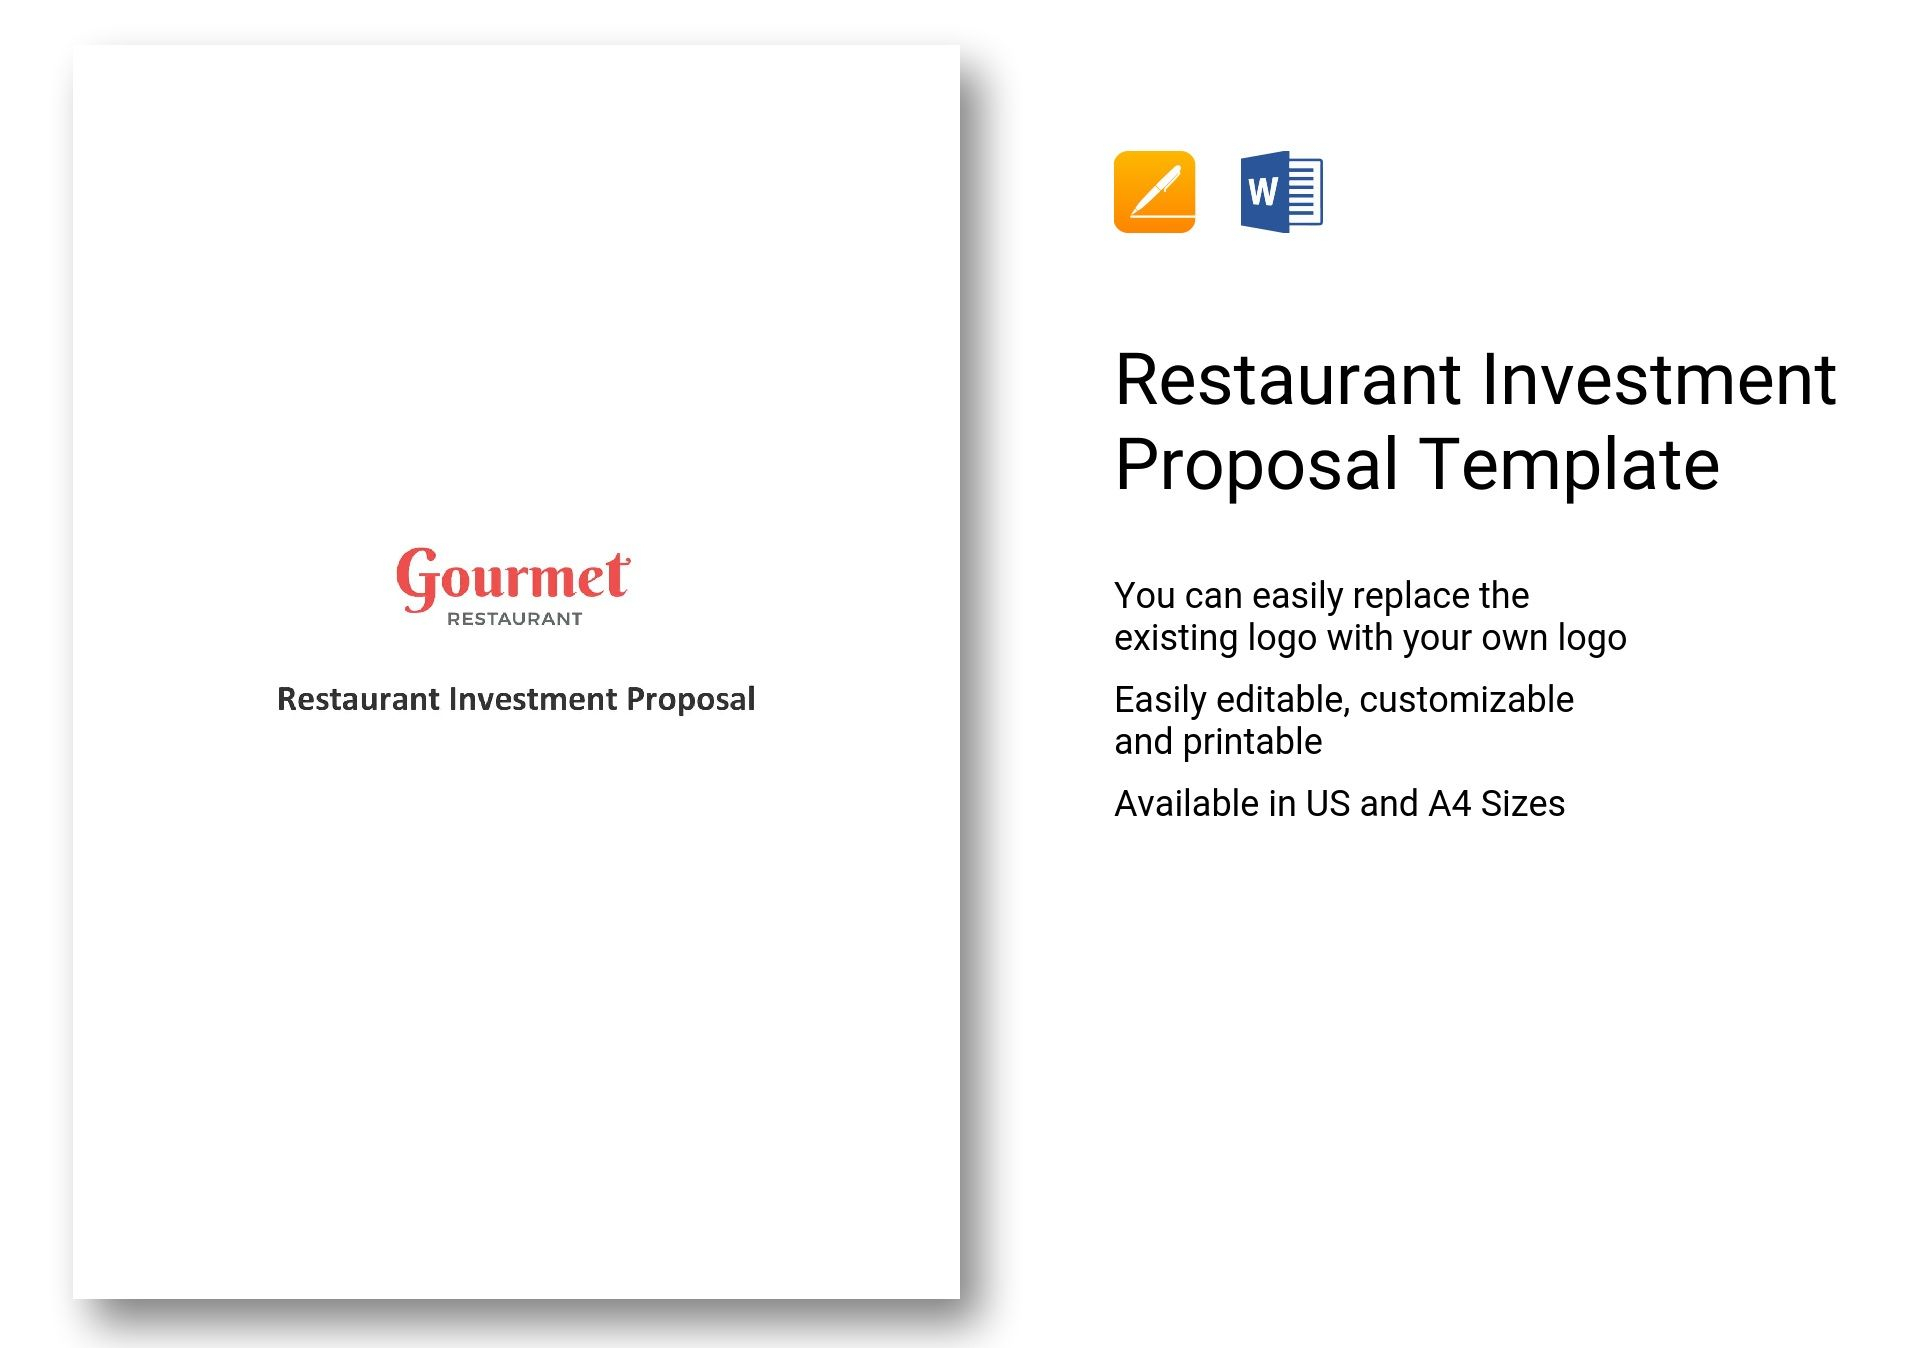 Restaurant Investment Proposal Template In Word, Apple Pages With Regard To Investment Proposal Template